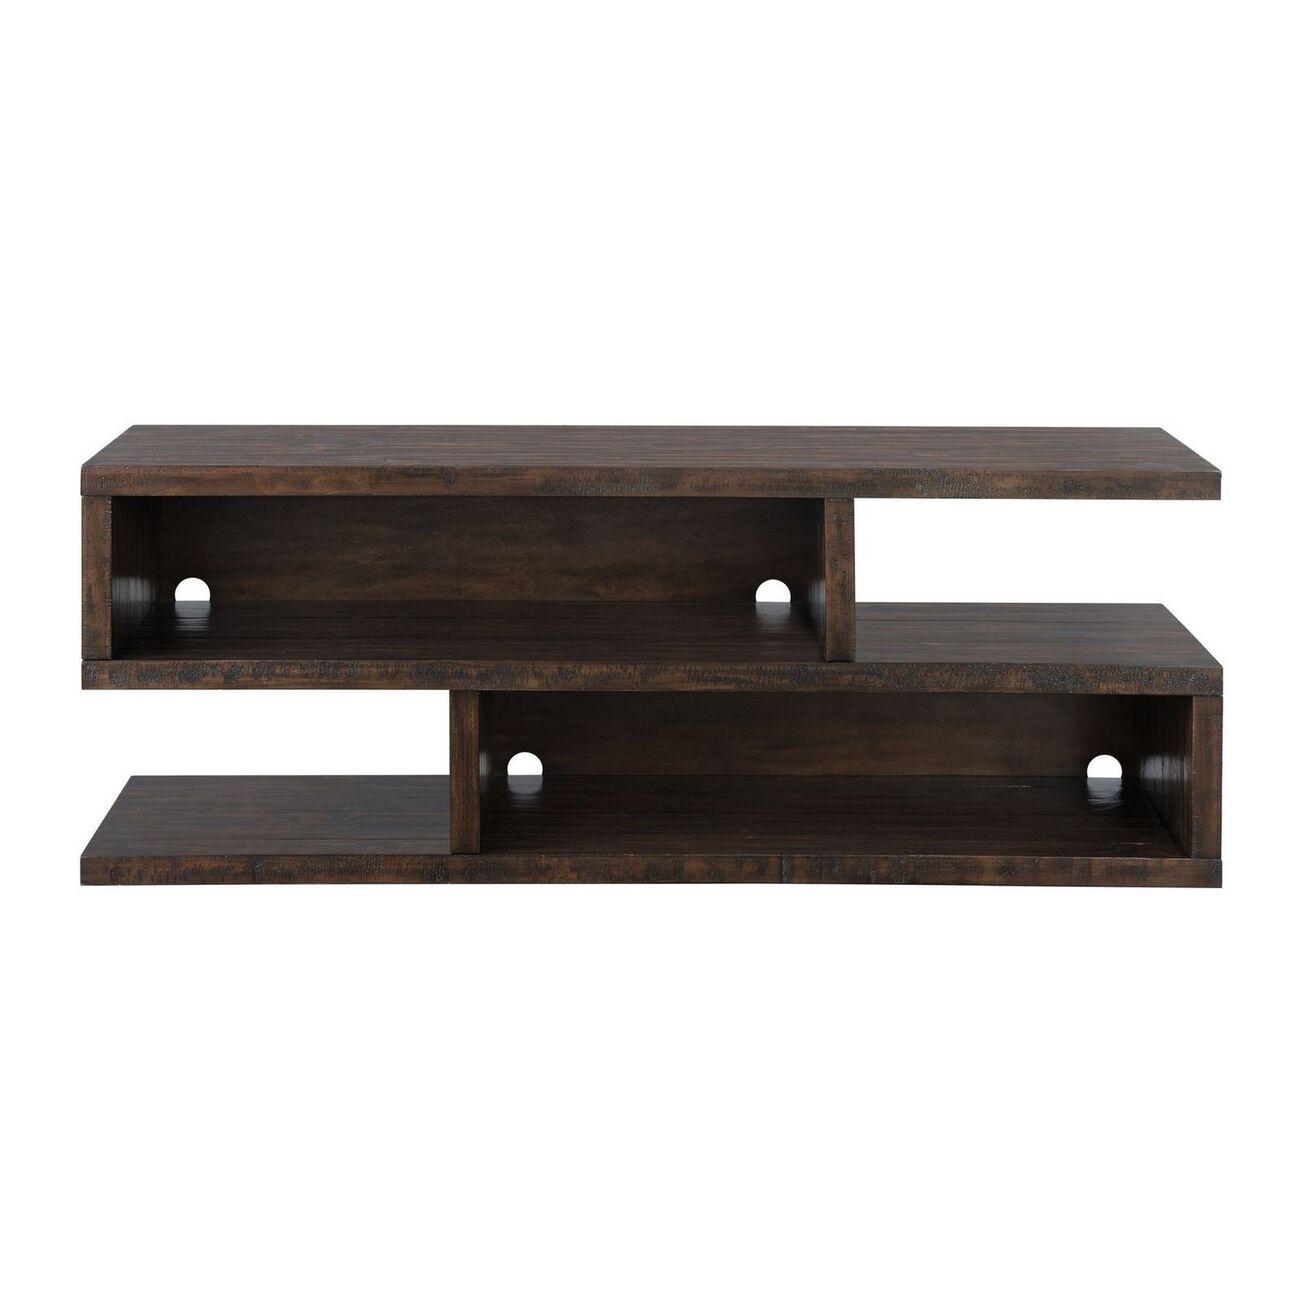 70 Inch Contemporary Wooden TV Stand with Flat Base, Brown